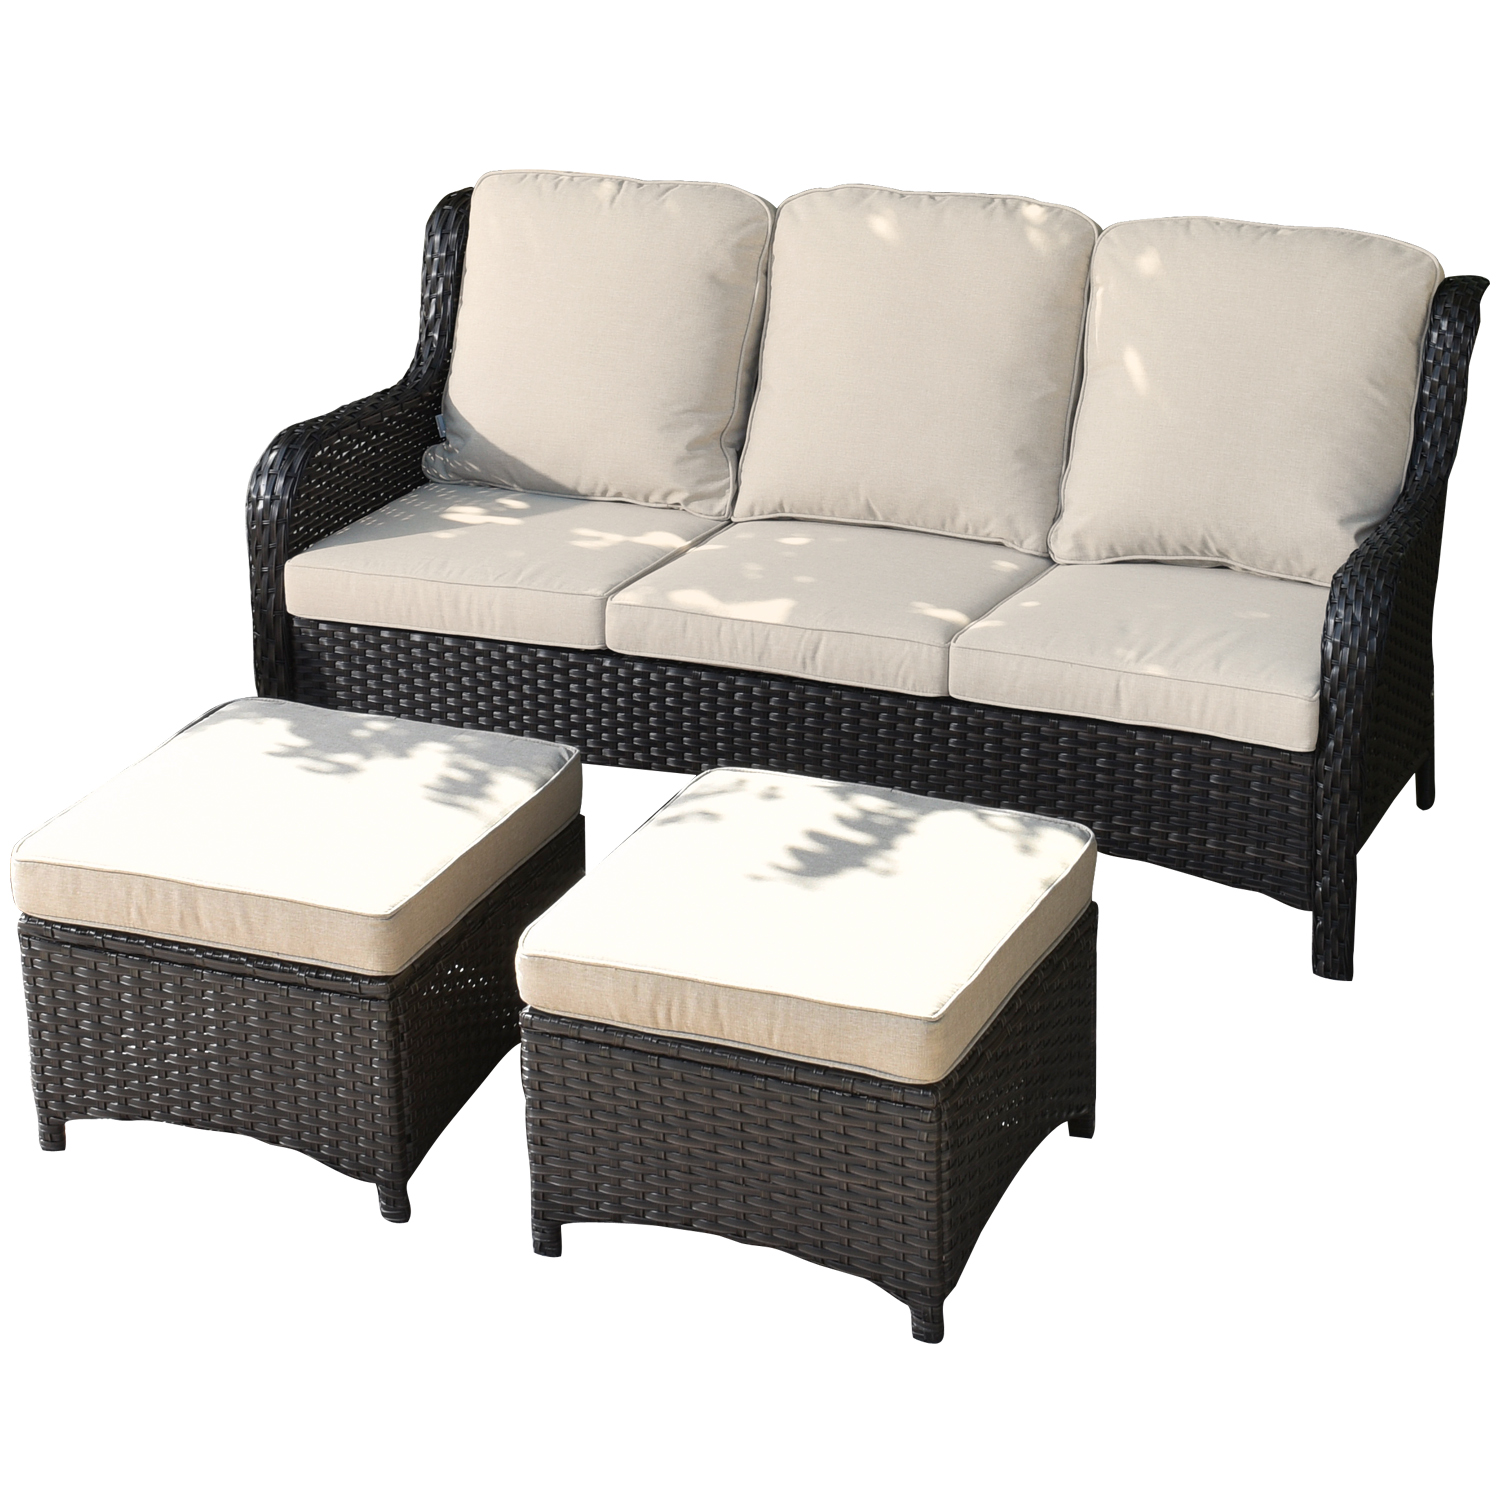 Ovios Outdoor Patio Furniture Set on sale 3 Pieces, Wicker Patio Sectional Furniture Set, PE Rattan Seating Group with Ottoman for Backyard - image 2 of 6